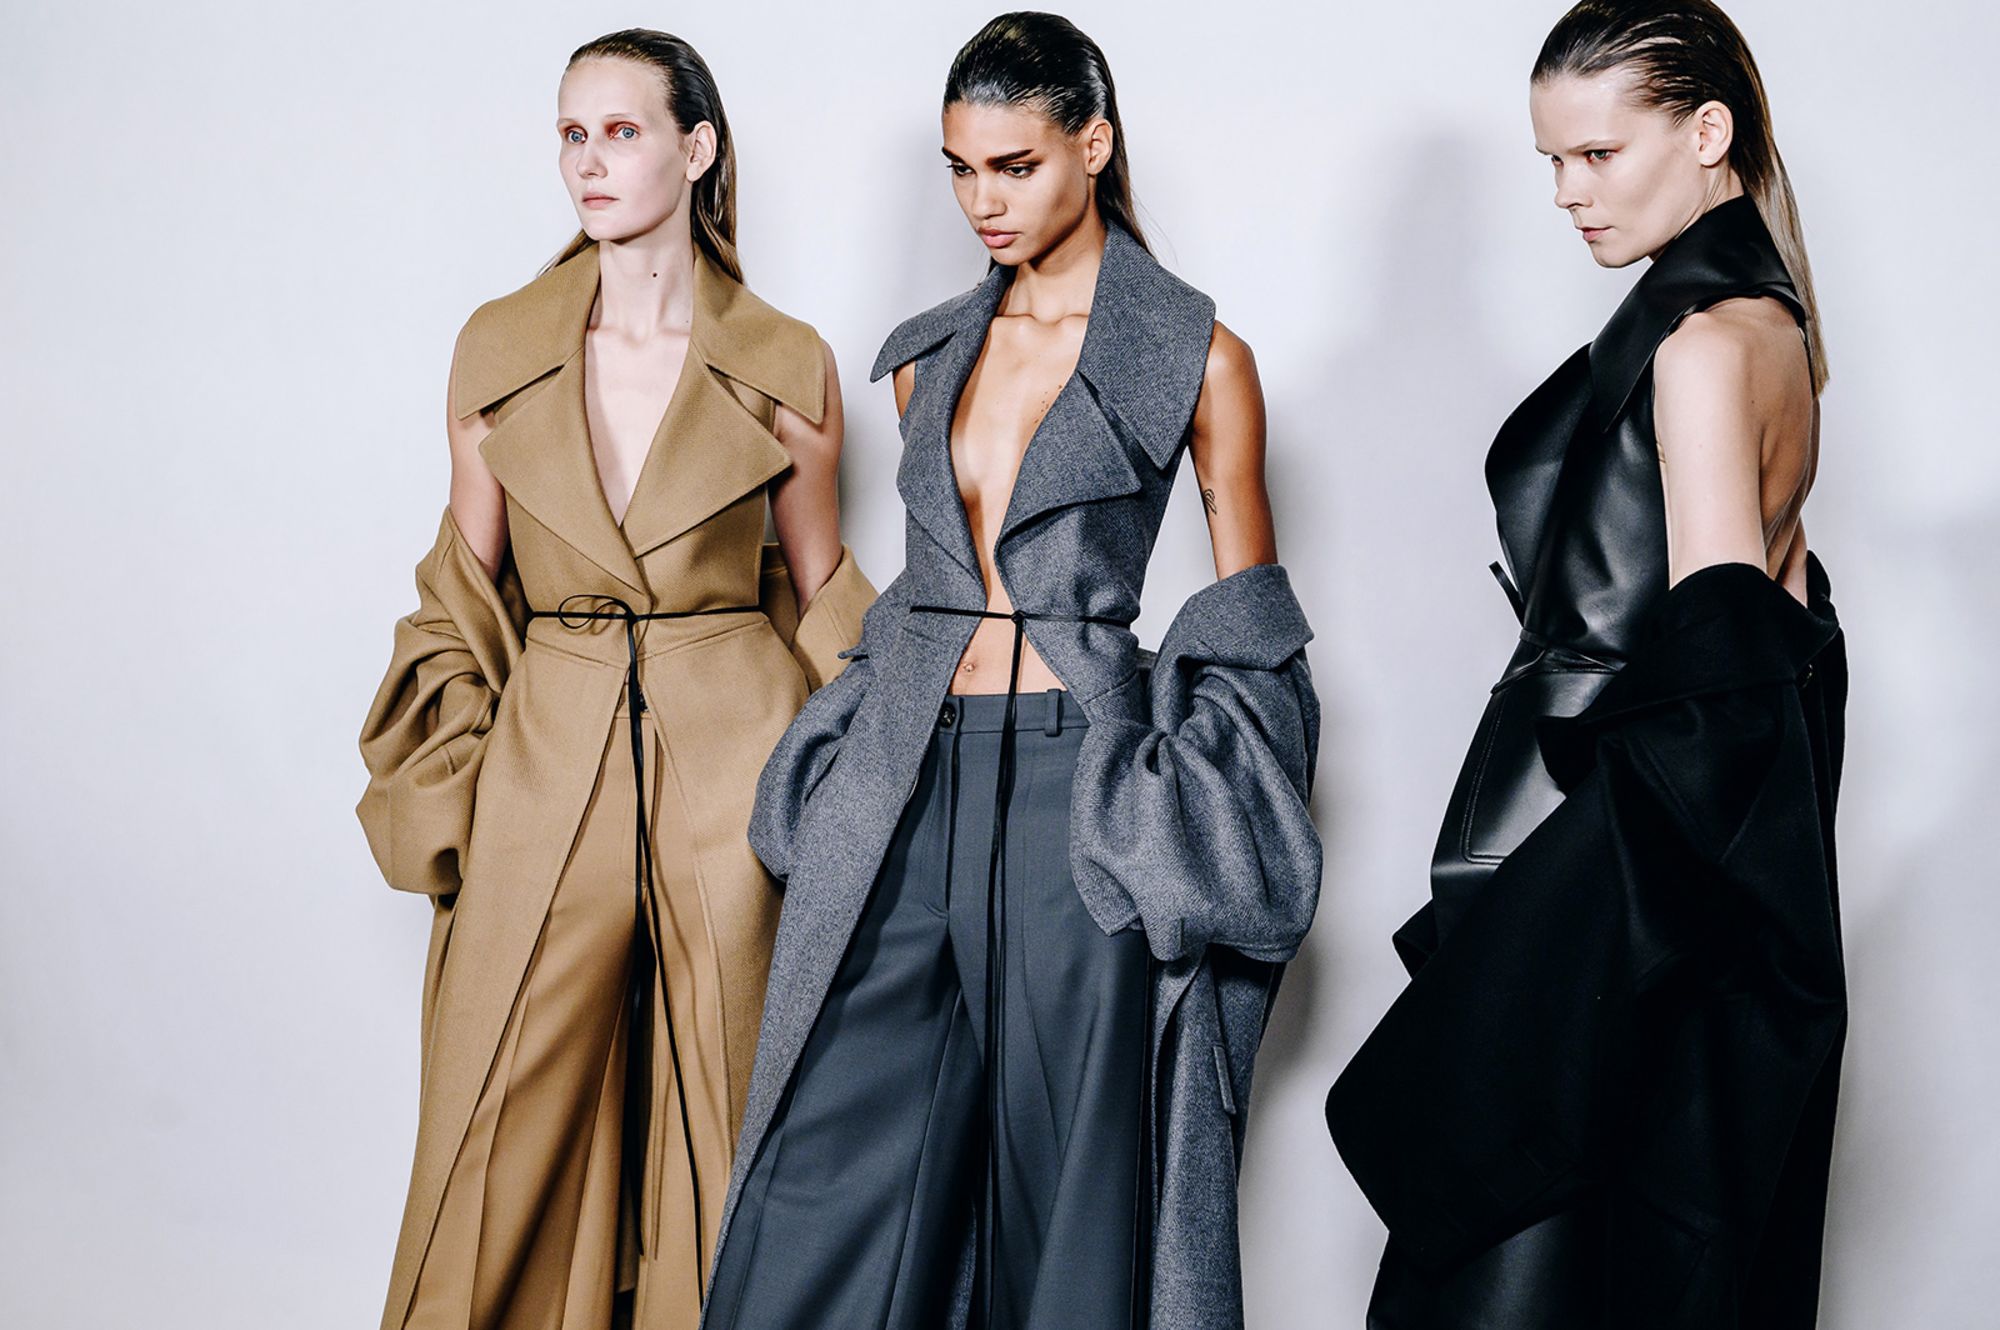 Helmut Lang: 5 things to know about Peter Do's debut collection